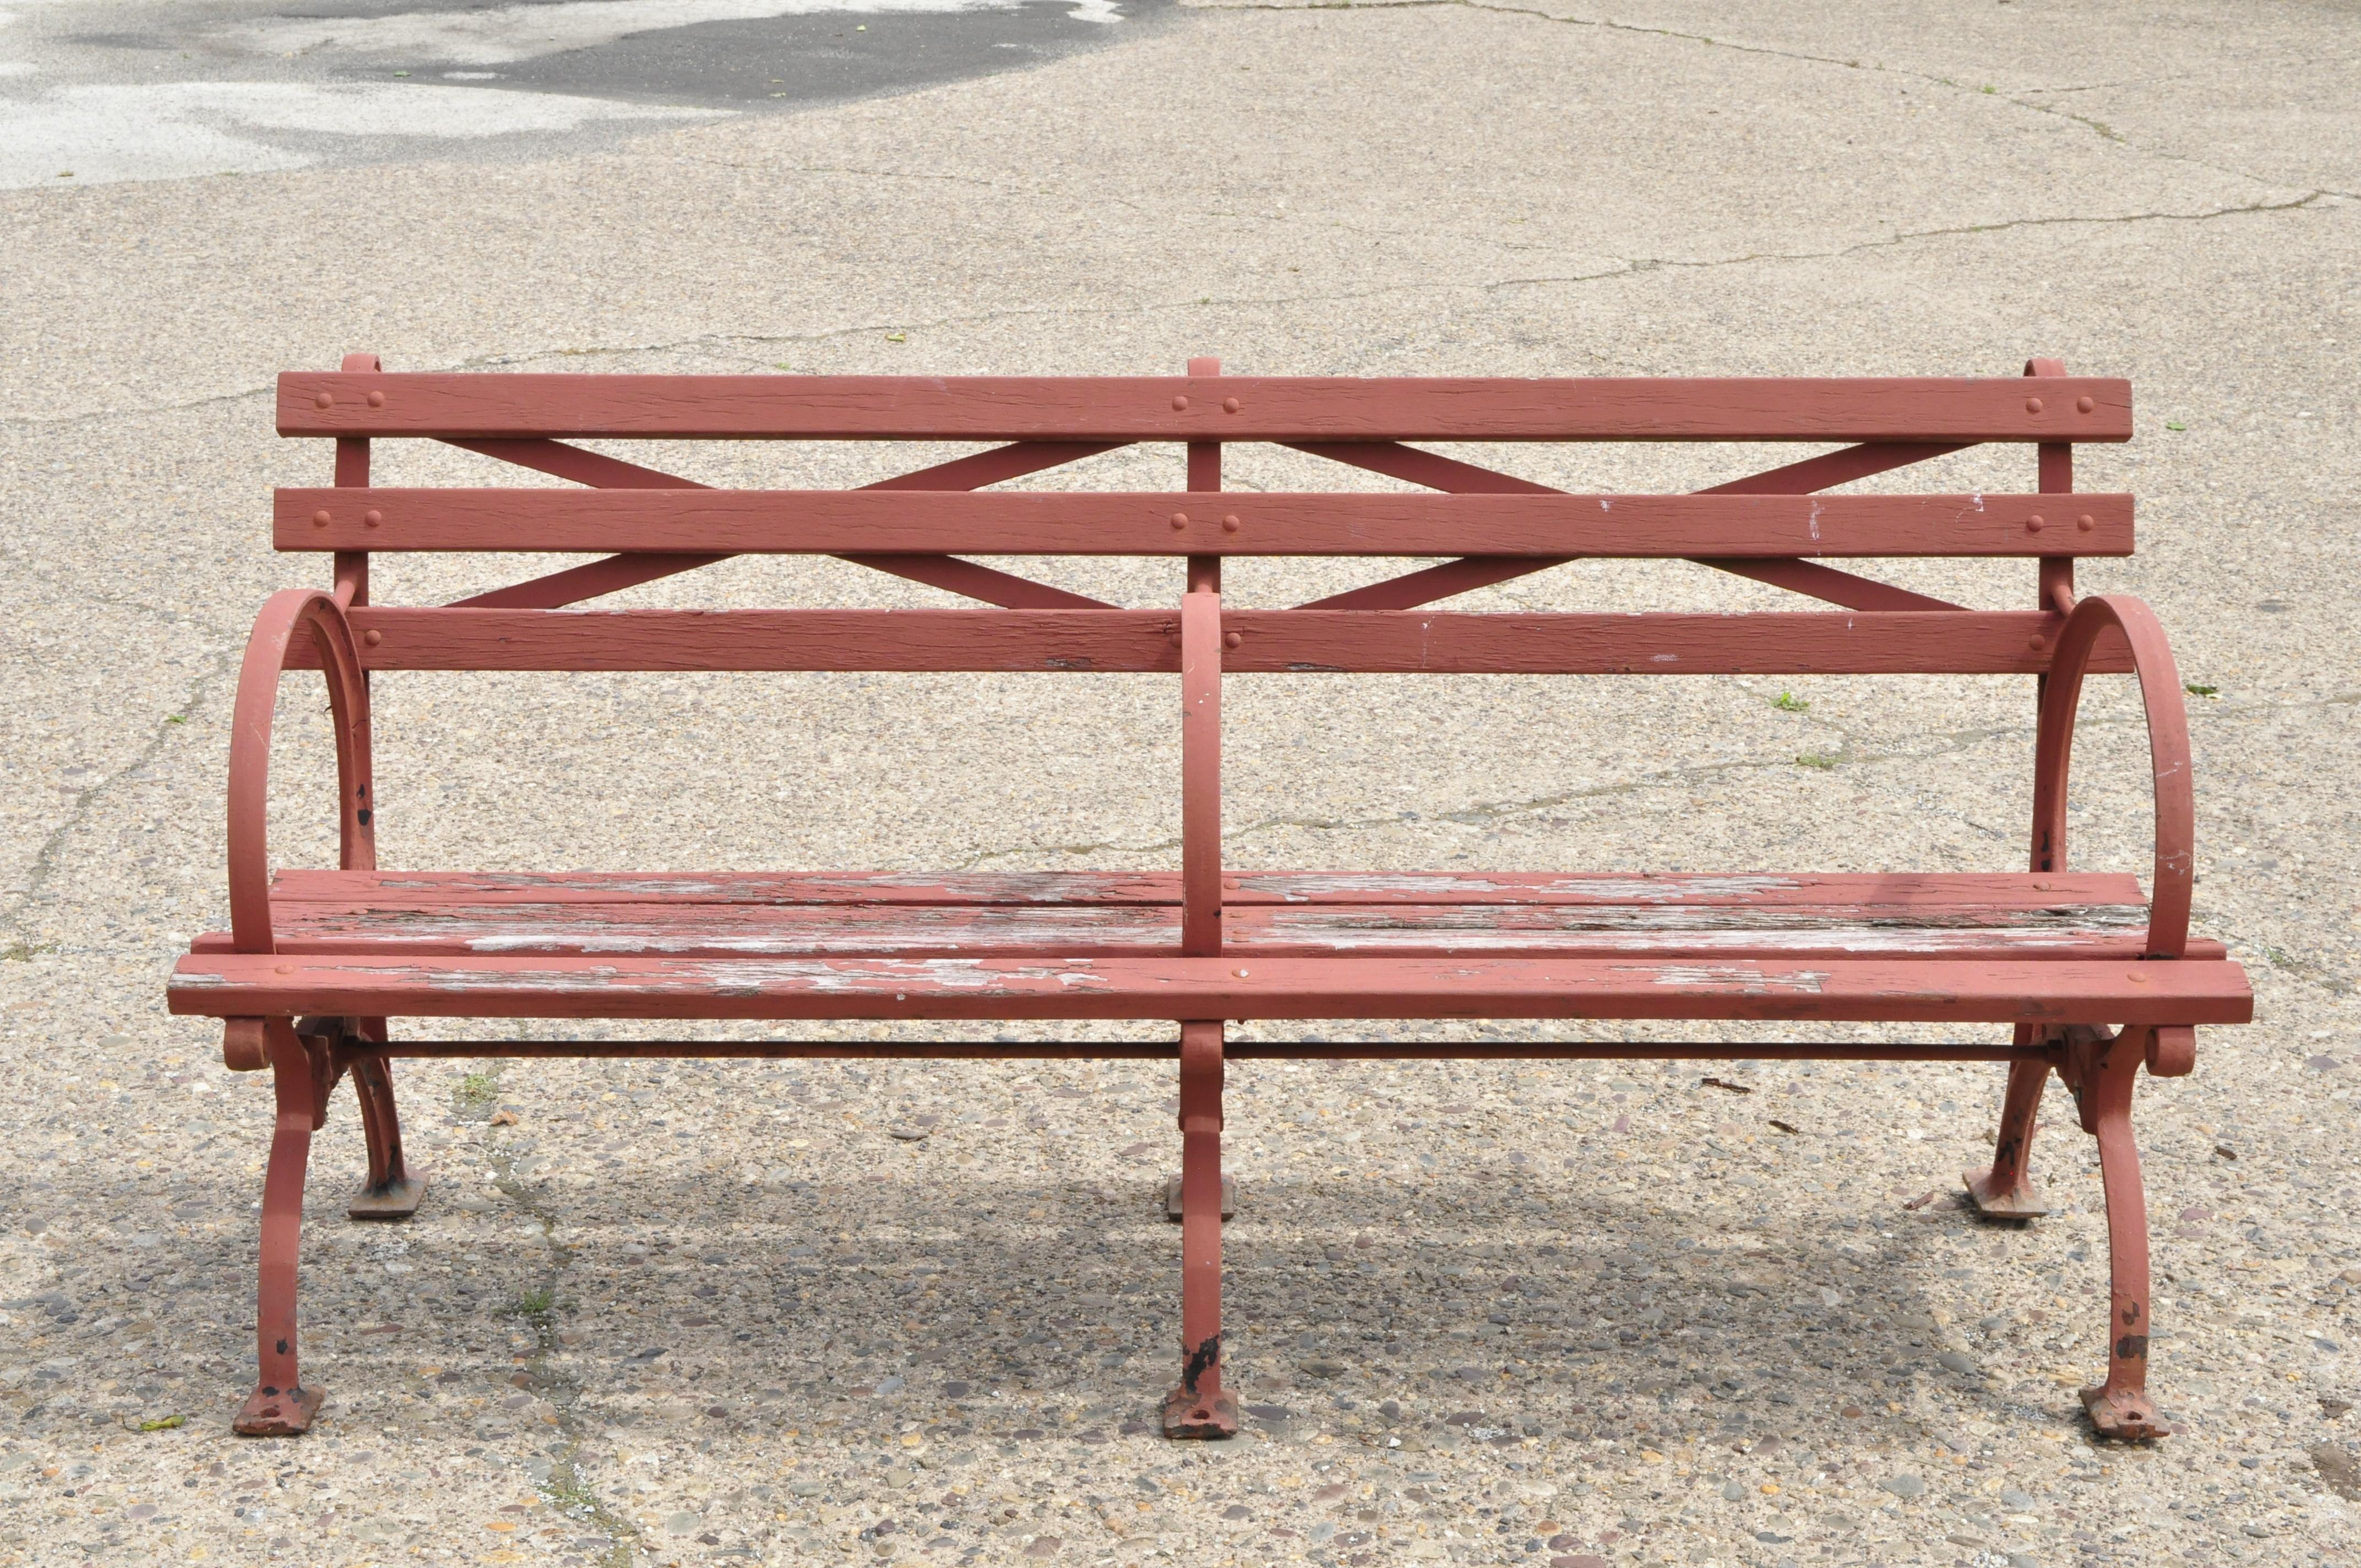 Art Deco 1939 Kenneth Lynch & Sons World's Fair NYC double cast iron Moses Bench. Item features approximately 180lbs, circa 1930s. Measurements: 34